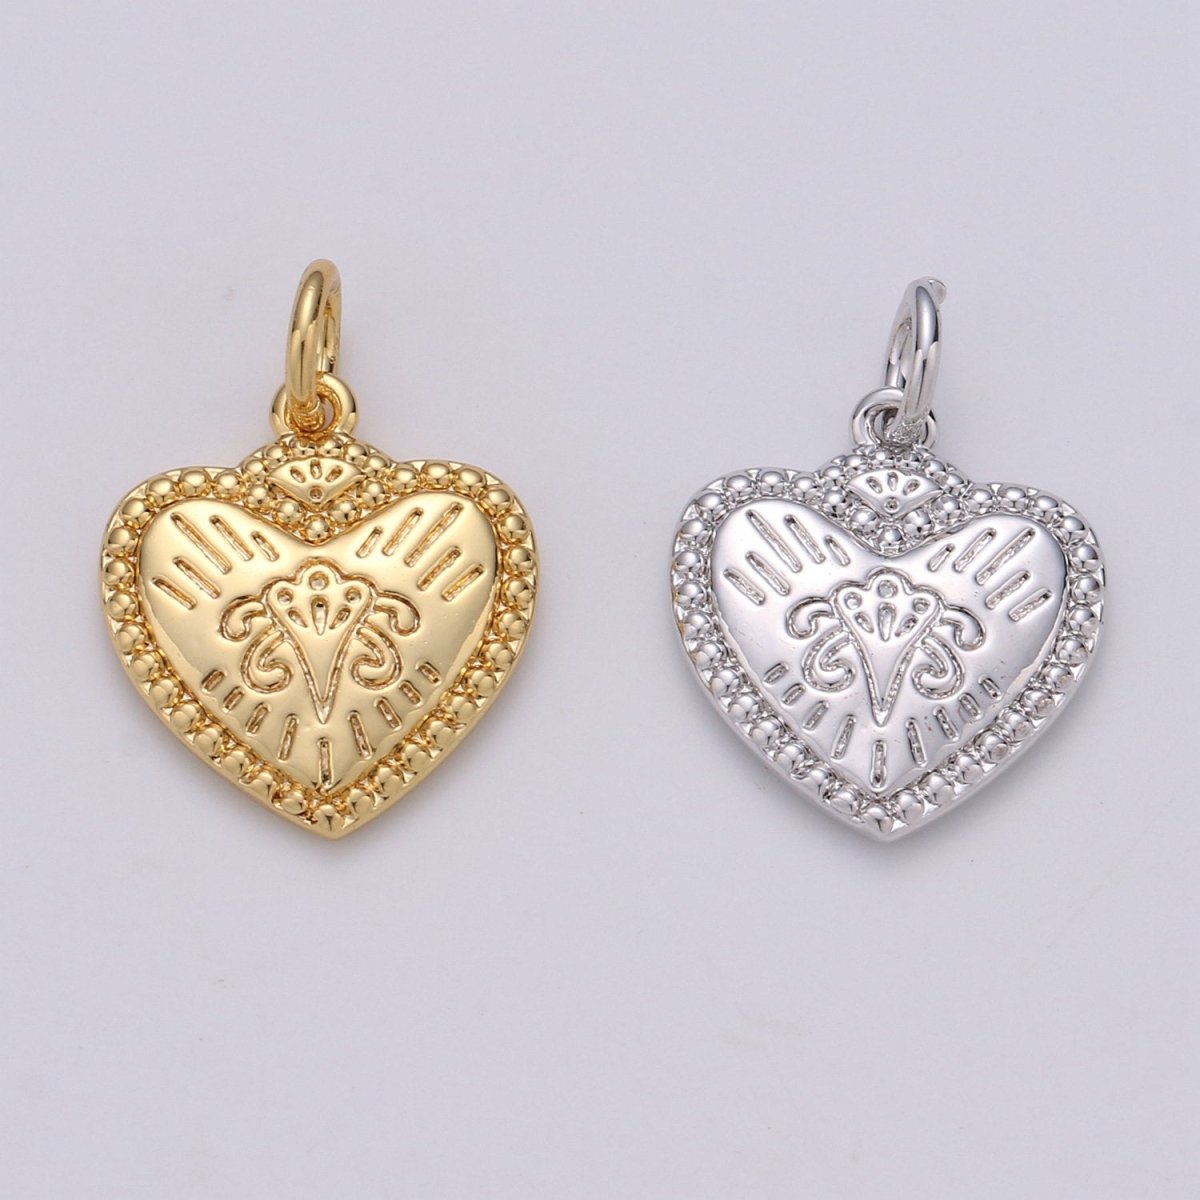 18X13mm 24k Gold Filled Heart Charms, Love Pendant, Dainty Silver Happy Heart Charm for Boho Bohemian Bracelet Earring Necklace supply D-413 D-414 - DLUXCA